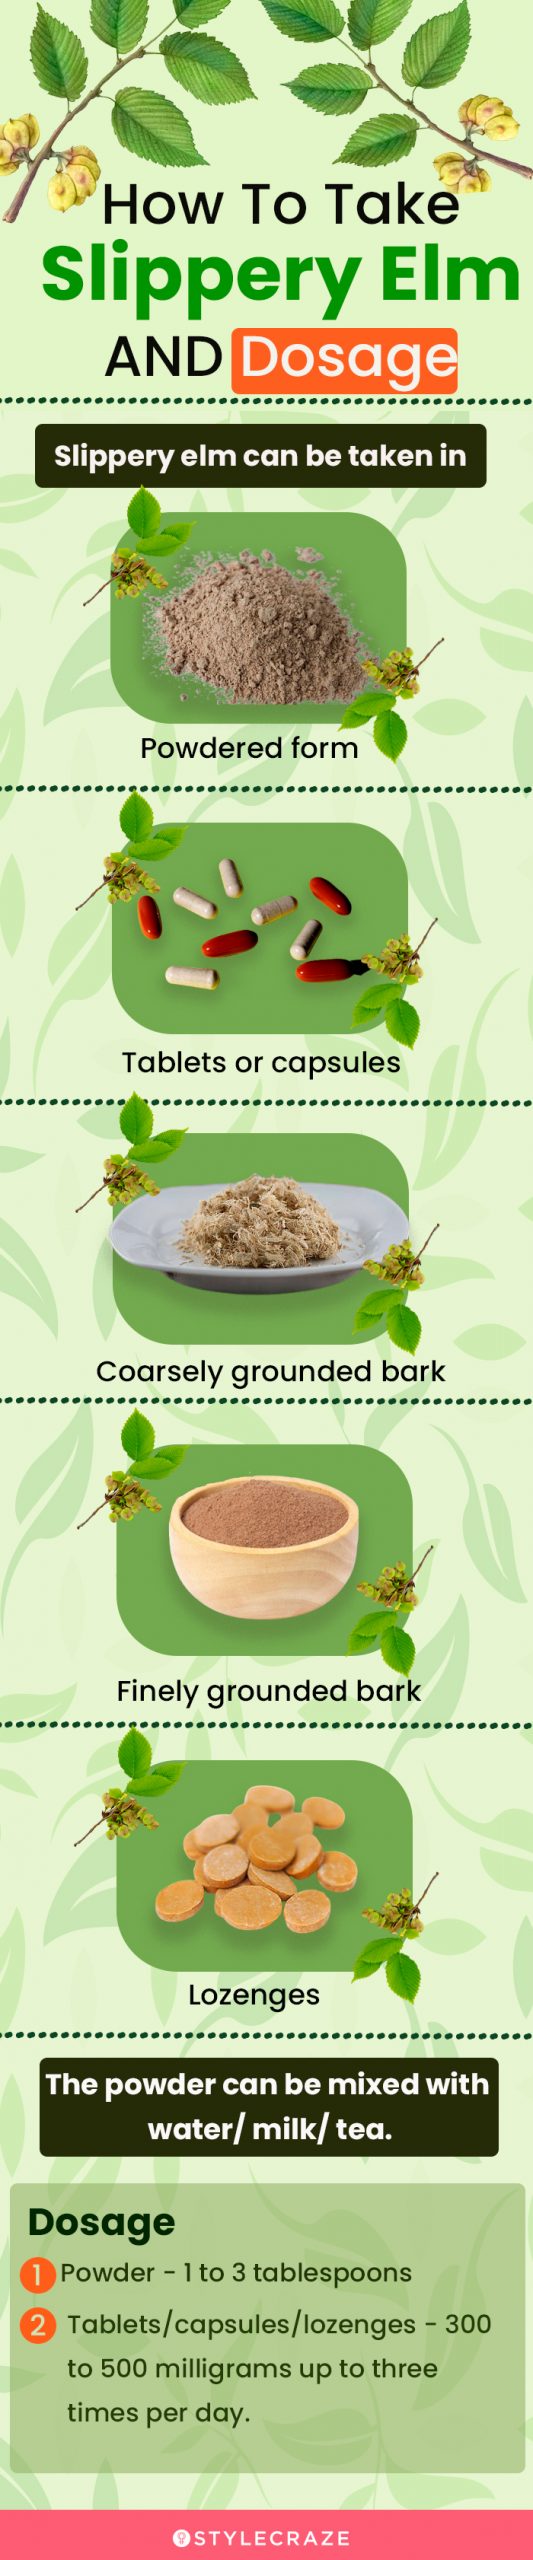 how to take slippery elm and dosage (infographic)